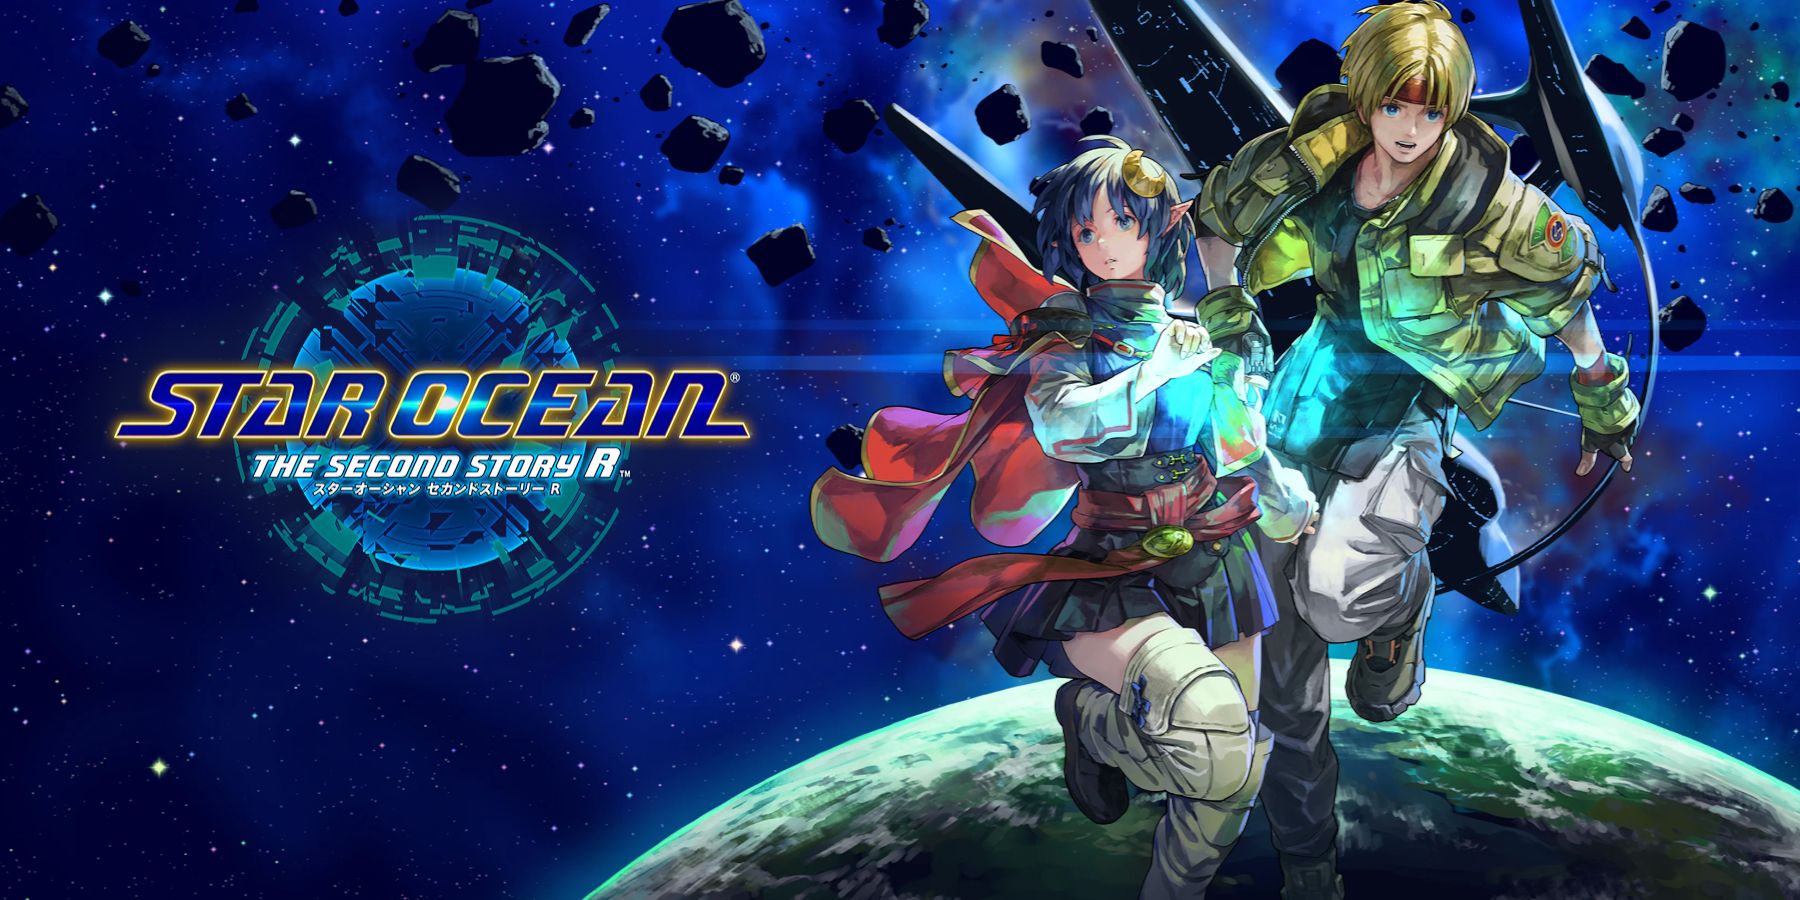 Star Ocean The Second Story R Reveals New Game+ and 'Assault Action'  Details - One More Game